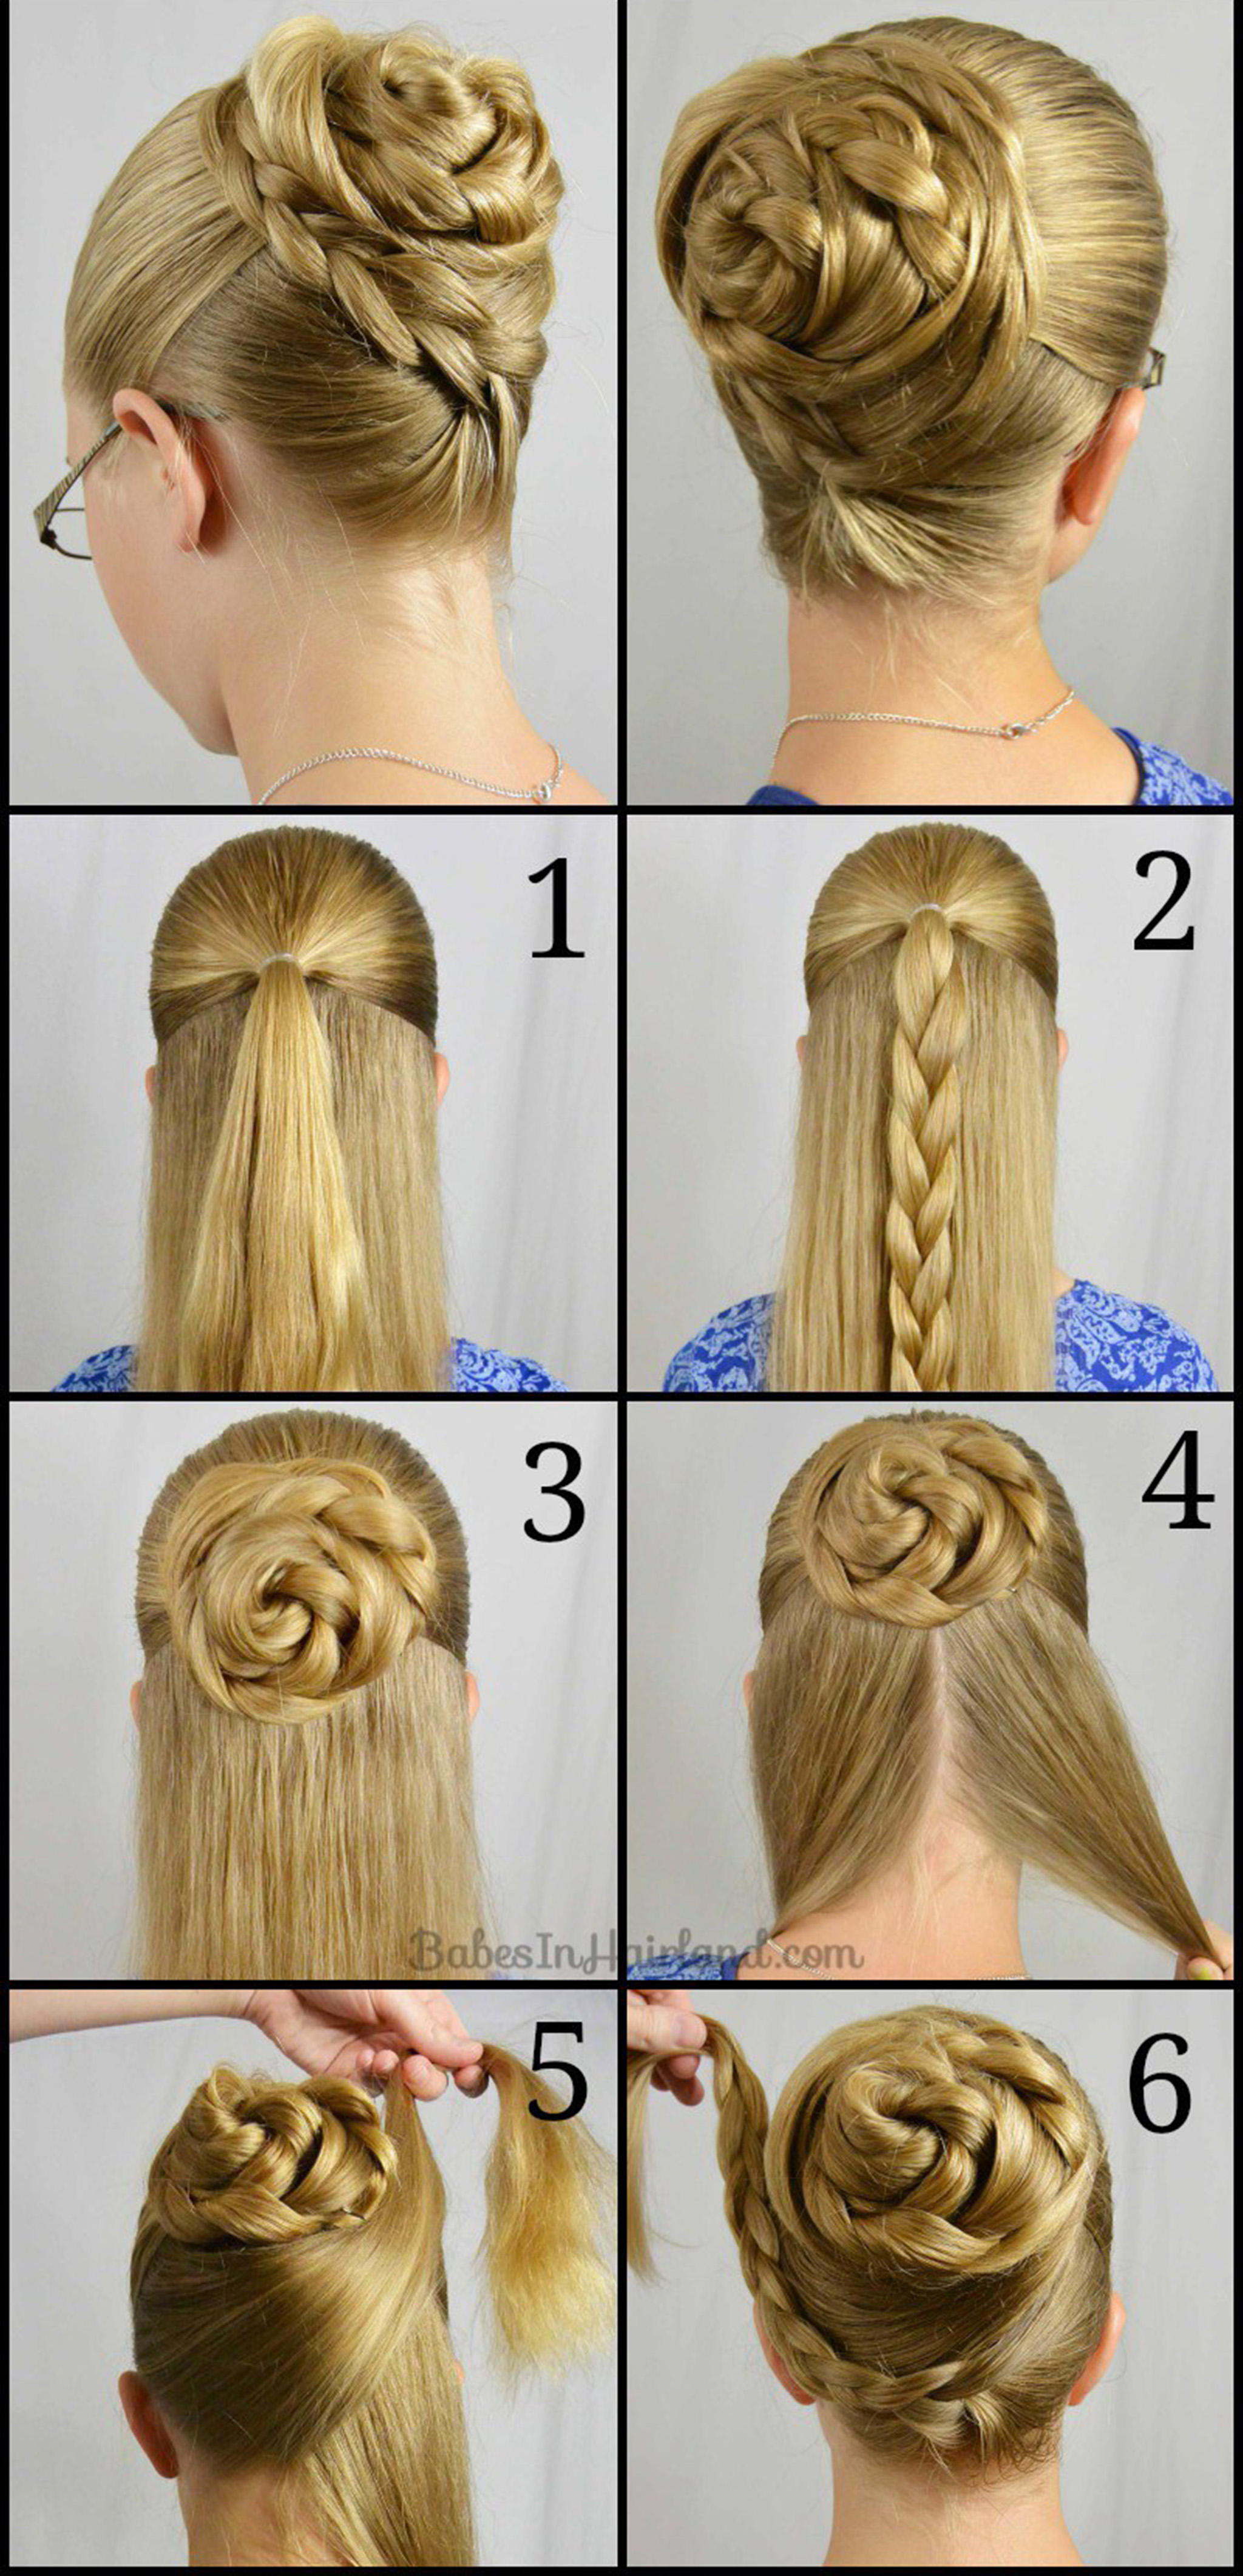 Top 10 Quick & Easy Braided Hairstyles Step By Step ...